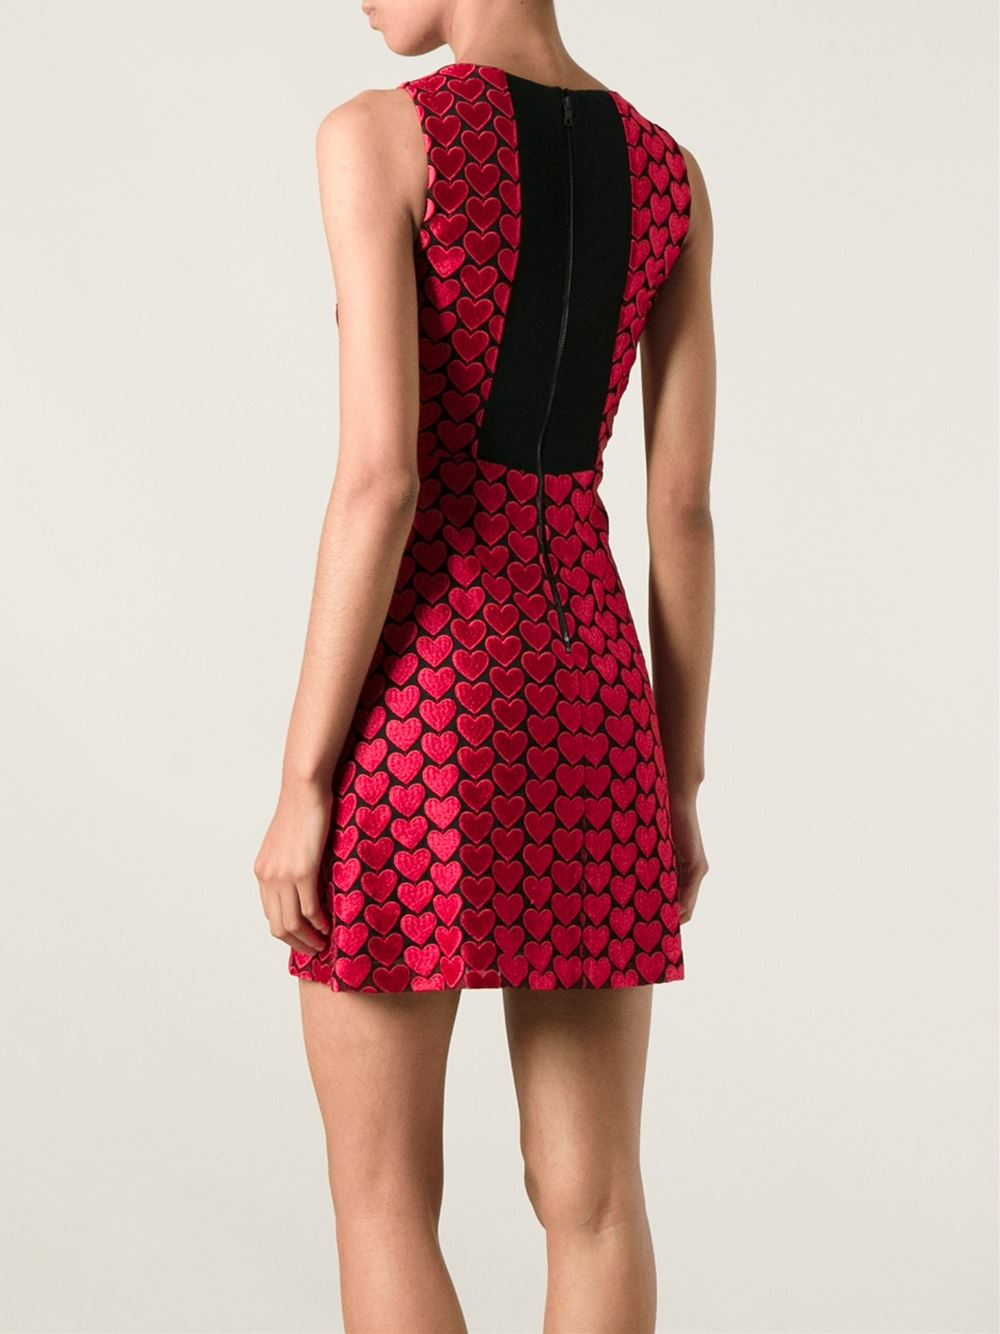 Lyst - Alice + Olivia Heart Pattern Embroidered Short Dress in Red